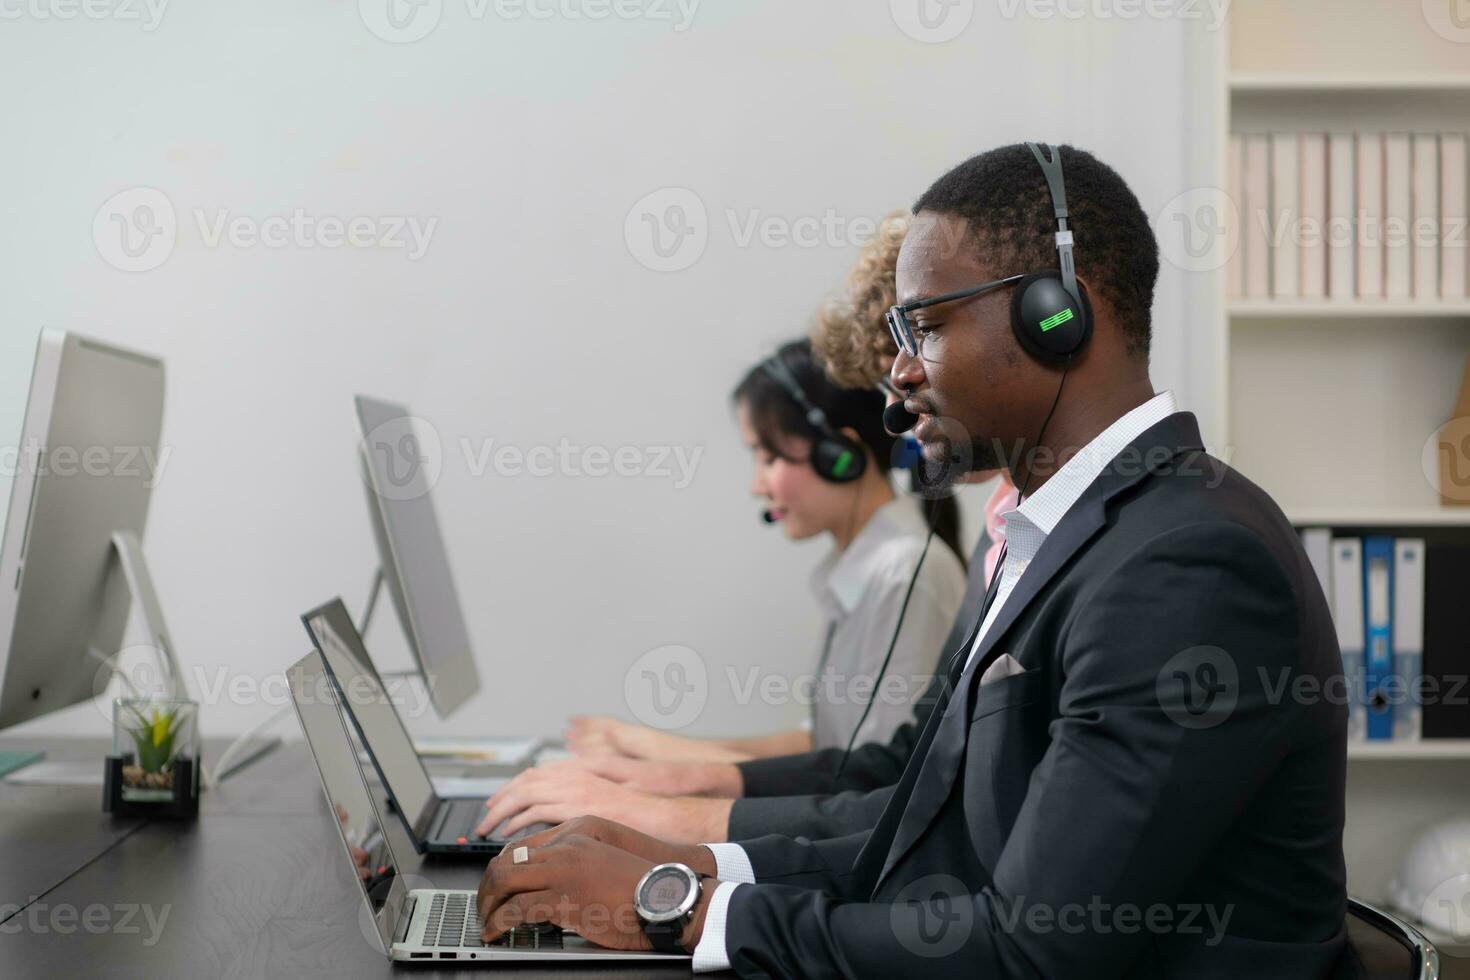 Group of business people wearing headset working actively in office. Call center, telemarketing, customer support agent provide service on telephone video conference call. photo